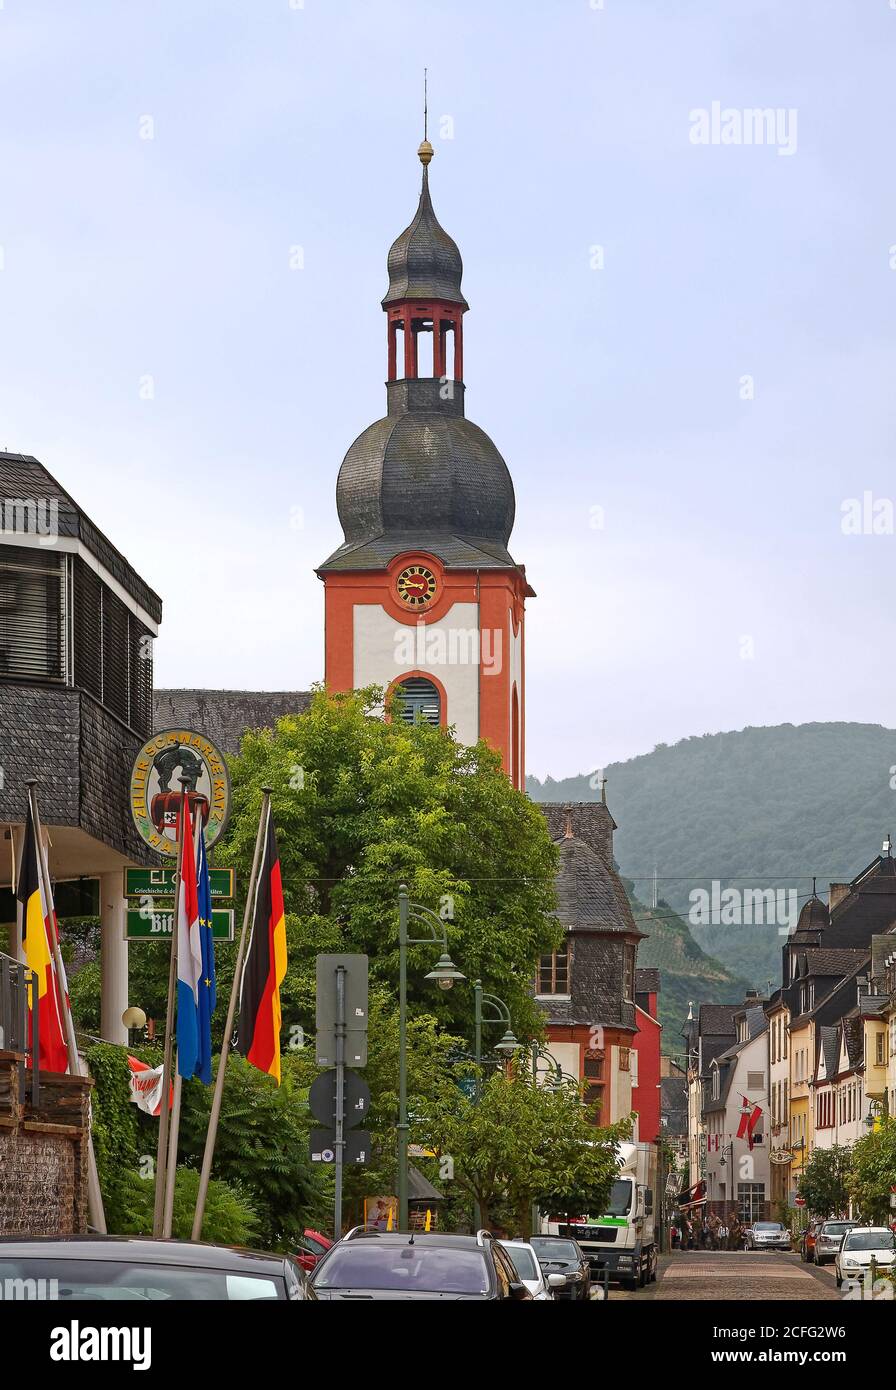 street scene, steeple, clock, St. Peter Church, cityscape, old buildings, flags, vehicles parked, green hillside, Europe, Zell; Germany Stock Photo